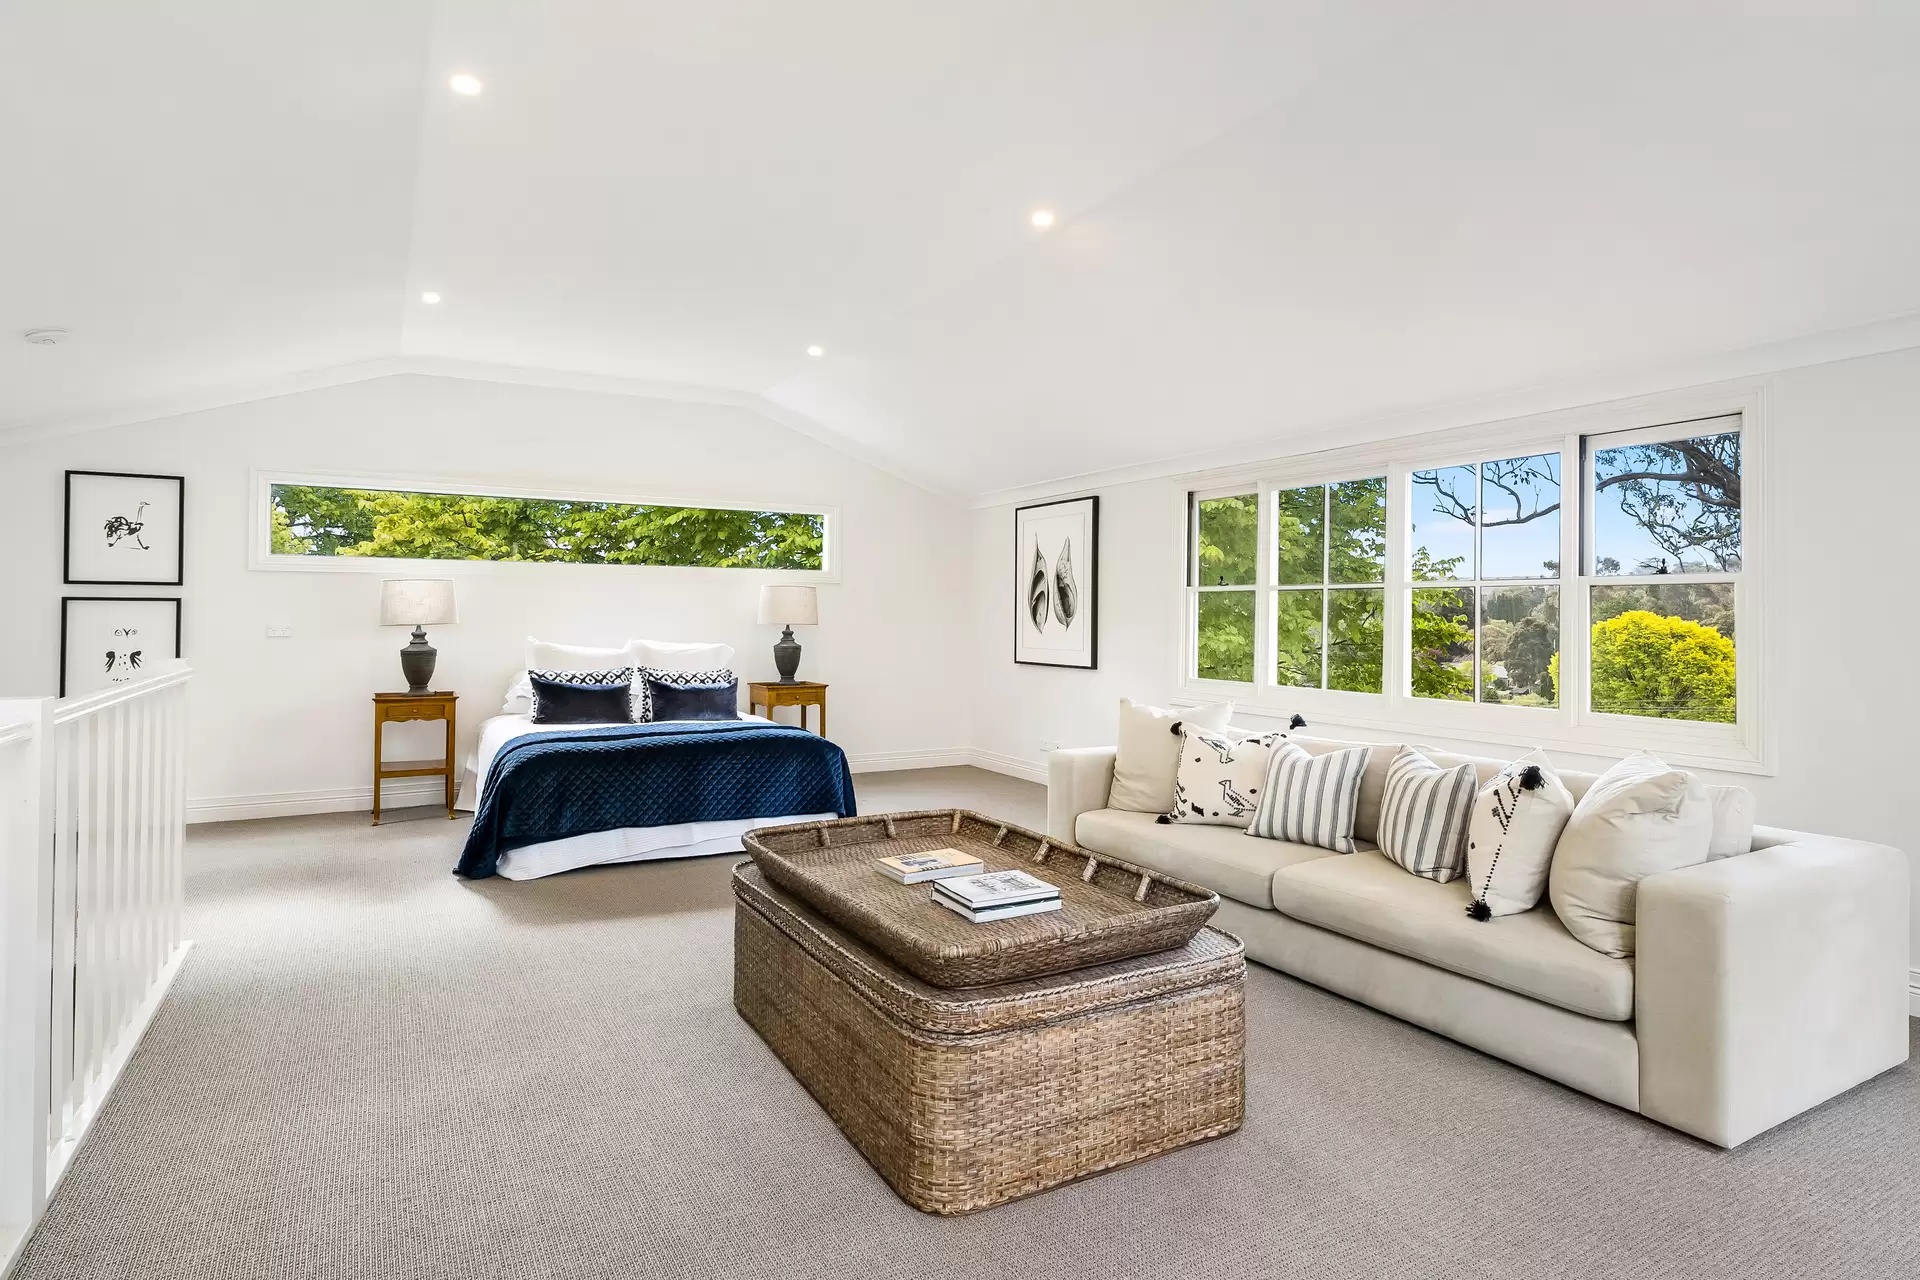 Photo #19: 119-127 Merrigang Street, Bowral - Sold by Drew Lindsay Sotheby's International Realty